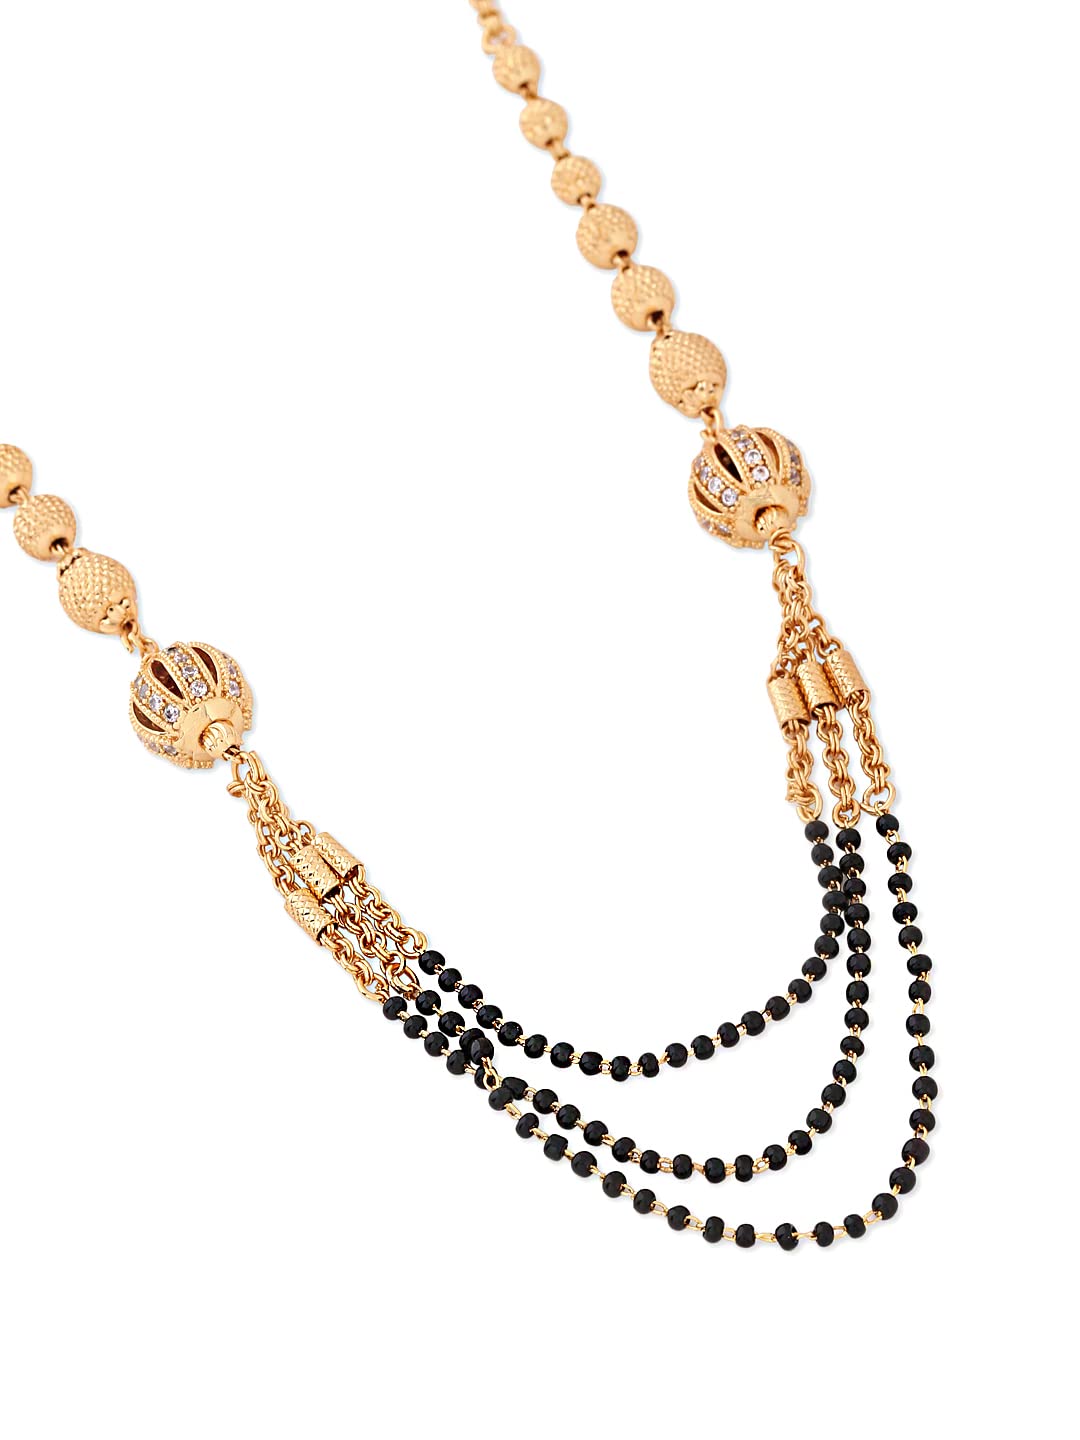 Yellow Chimes Mangal Sutra for Women Gold Toned Crystal Studded Beads Chain Designed Black Beads Mangal Sutra for Women and Girls